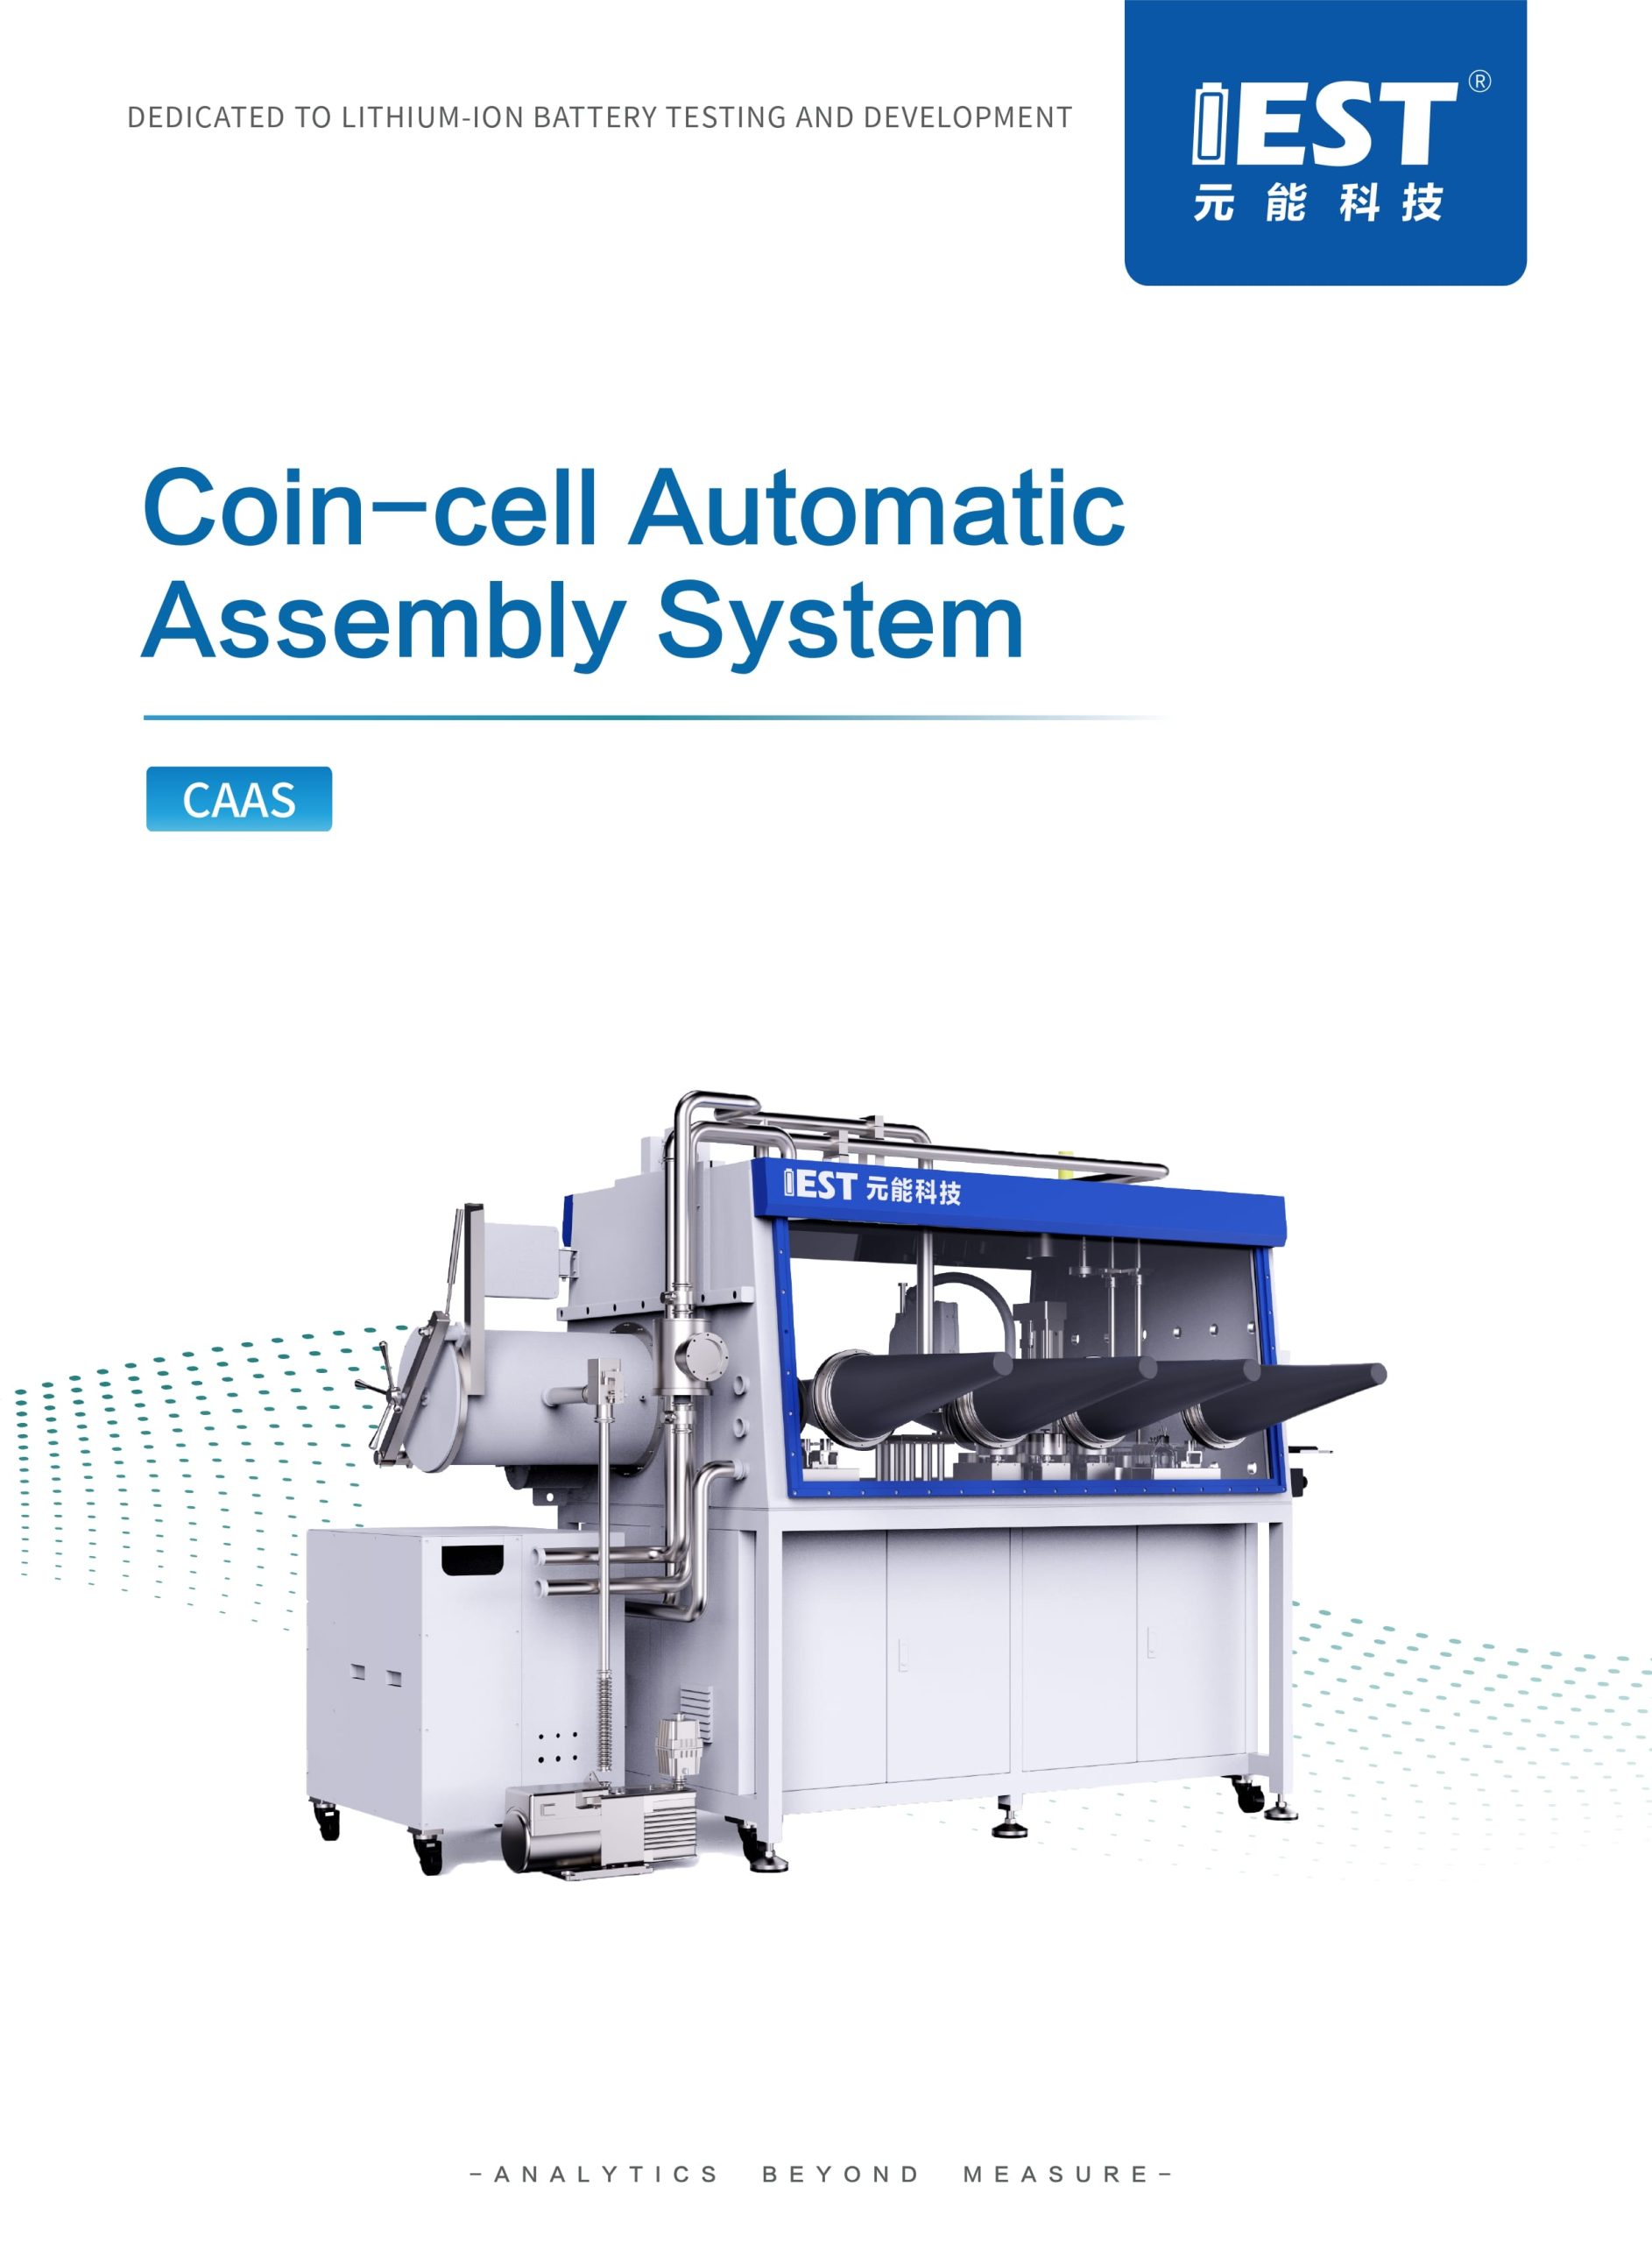 IEST Automatic Coin Cell Assembly System(CAAS)